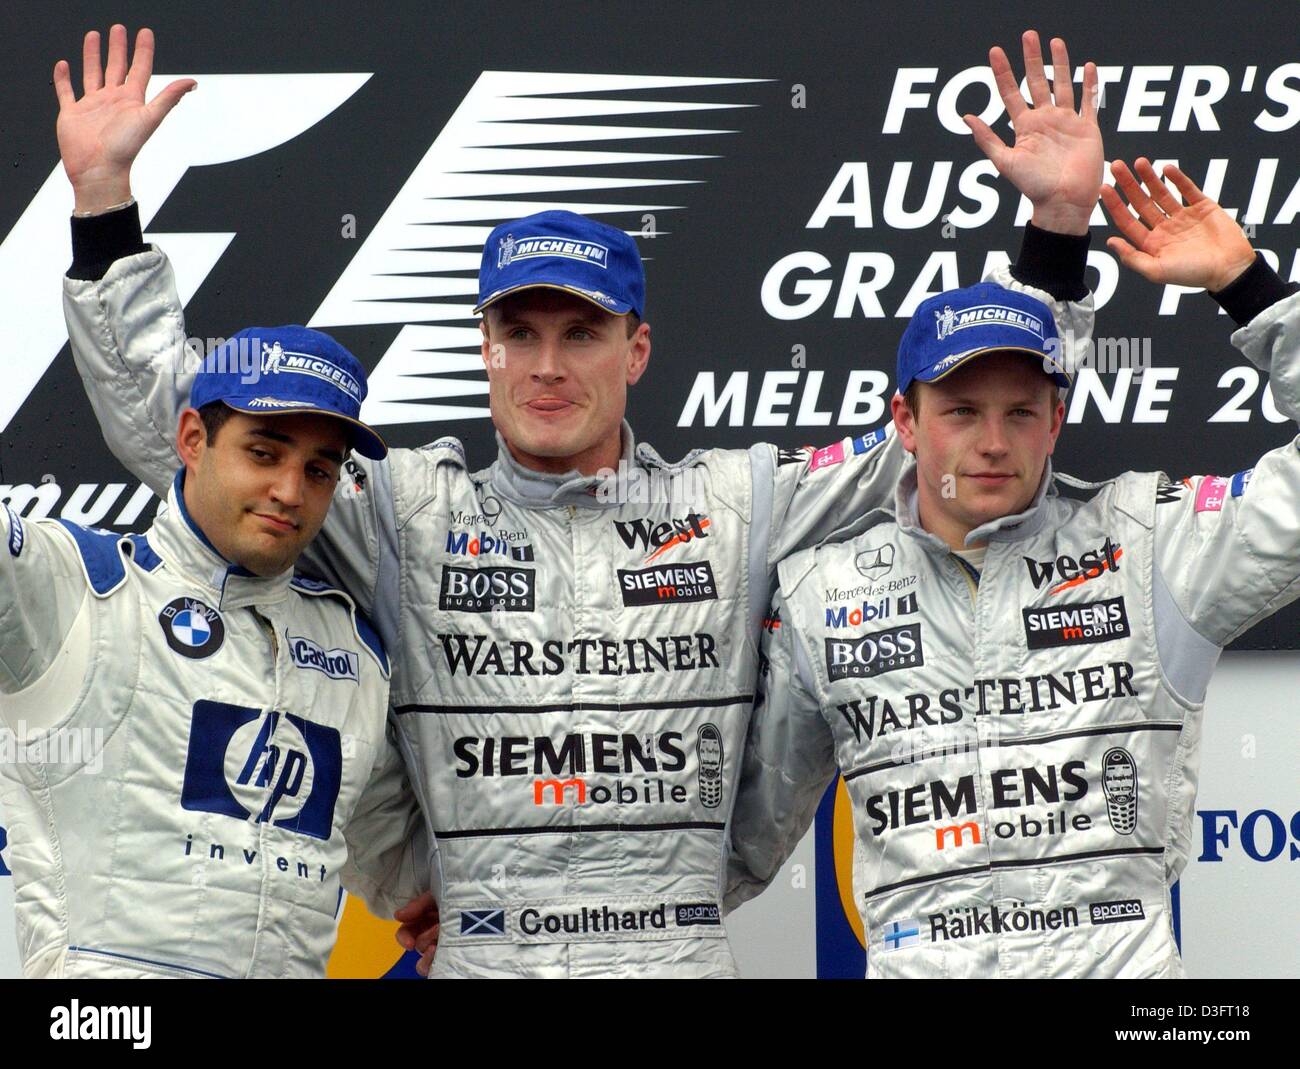 (dpa) - Scottish formula one pilot David Coulthard (C) of McLaren-Mercedes cheers with his Finnish team member Kimi Raeikkoenen (R) and Colombian Juan Pablo Montoya (L) of BMW Williams on the race-track in Melbourne, Australia, 9 March 2003. He wins the year's first race of the formula one for the Grand Prix of Australia and celebrates his 13th victory in his 142nd formula one race Stock Photo